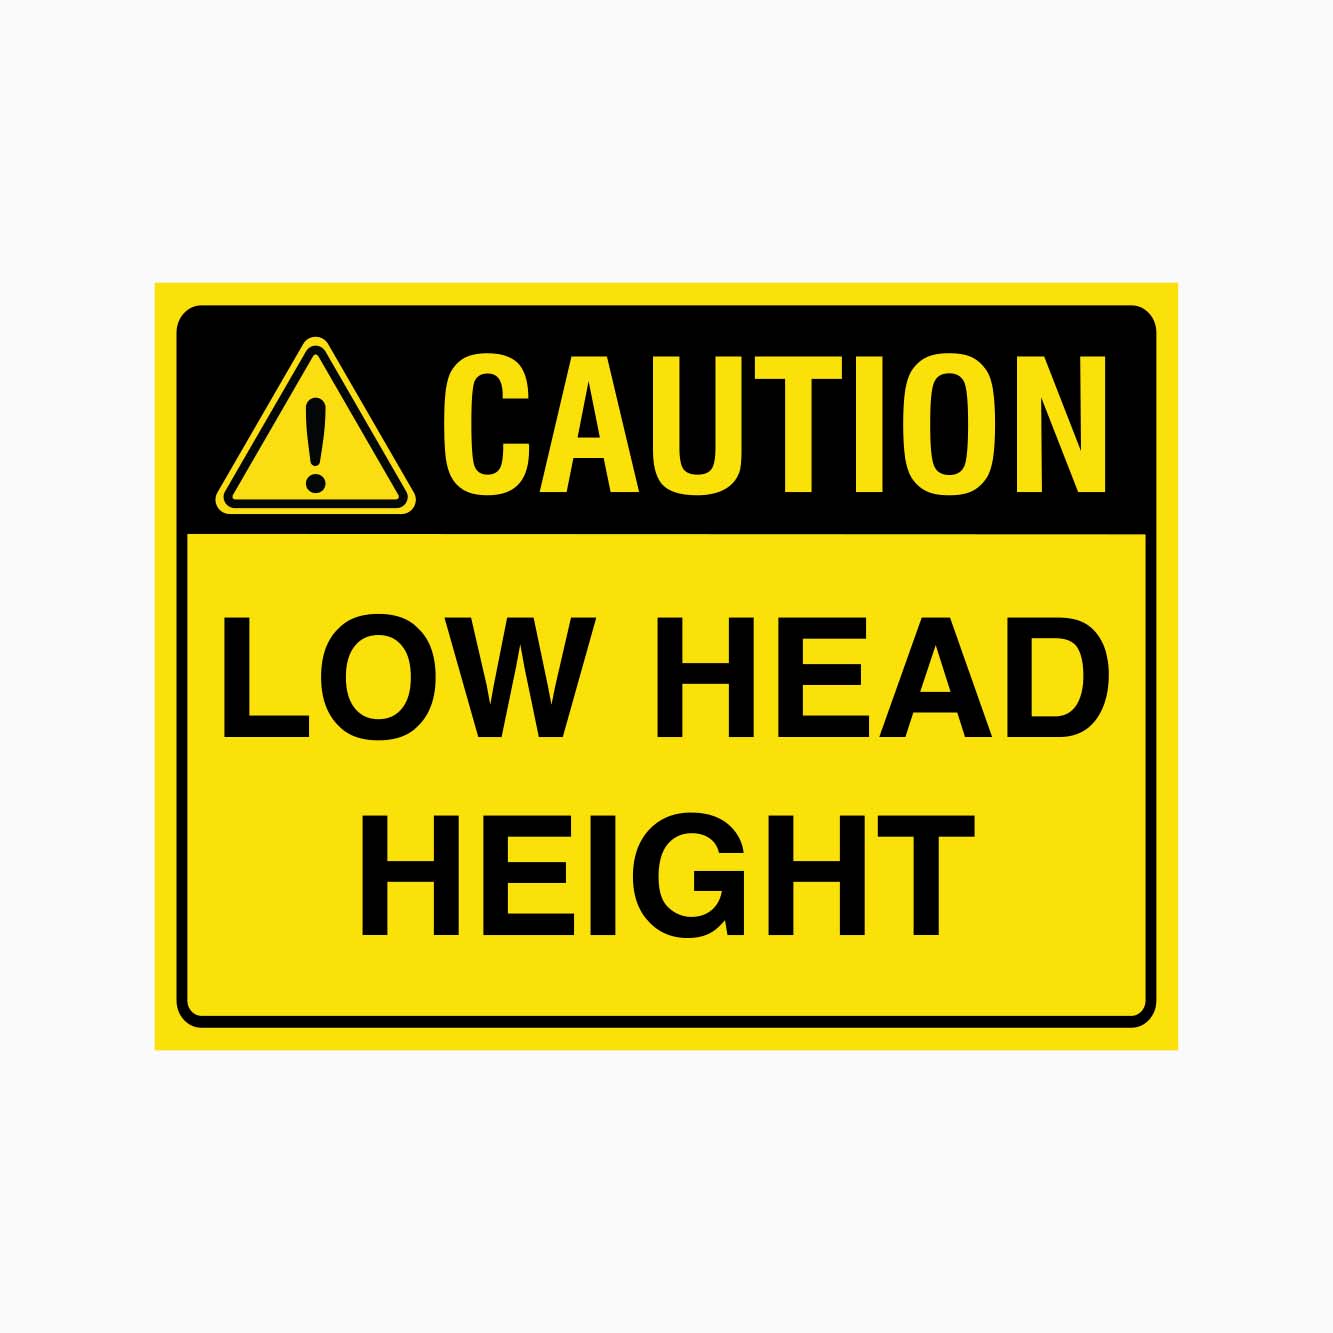 CAUTION LOW HEAD HEIGHT SIGN - GET SIGNS